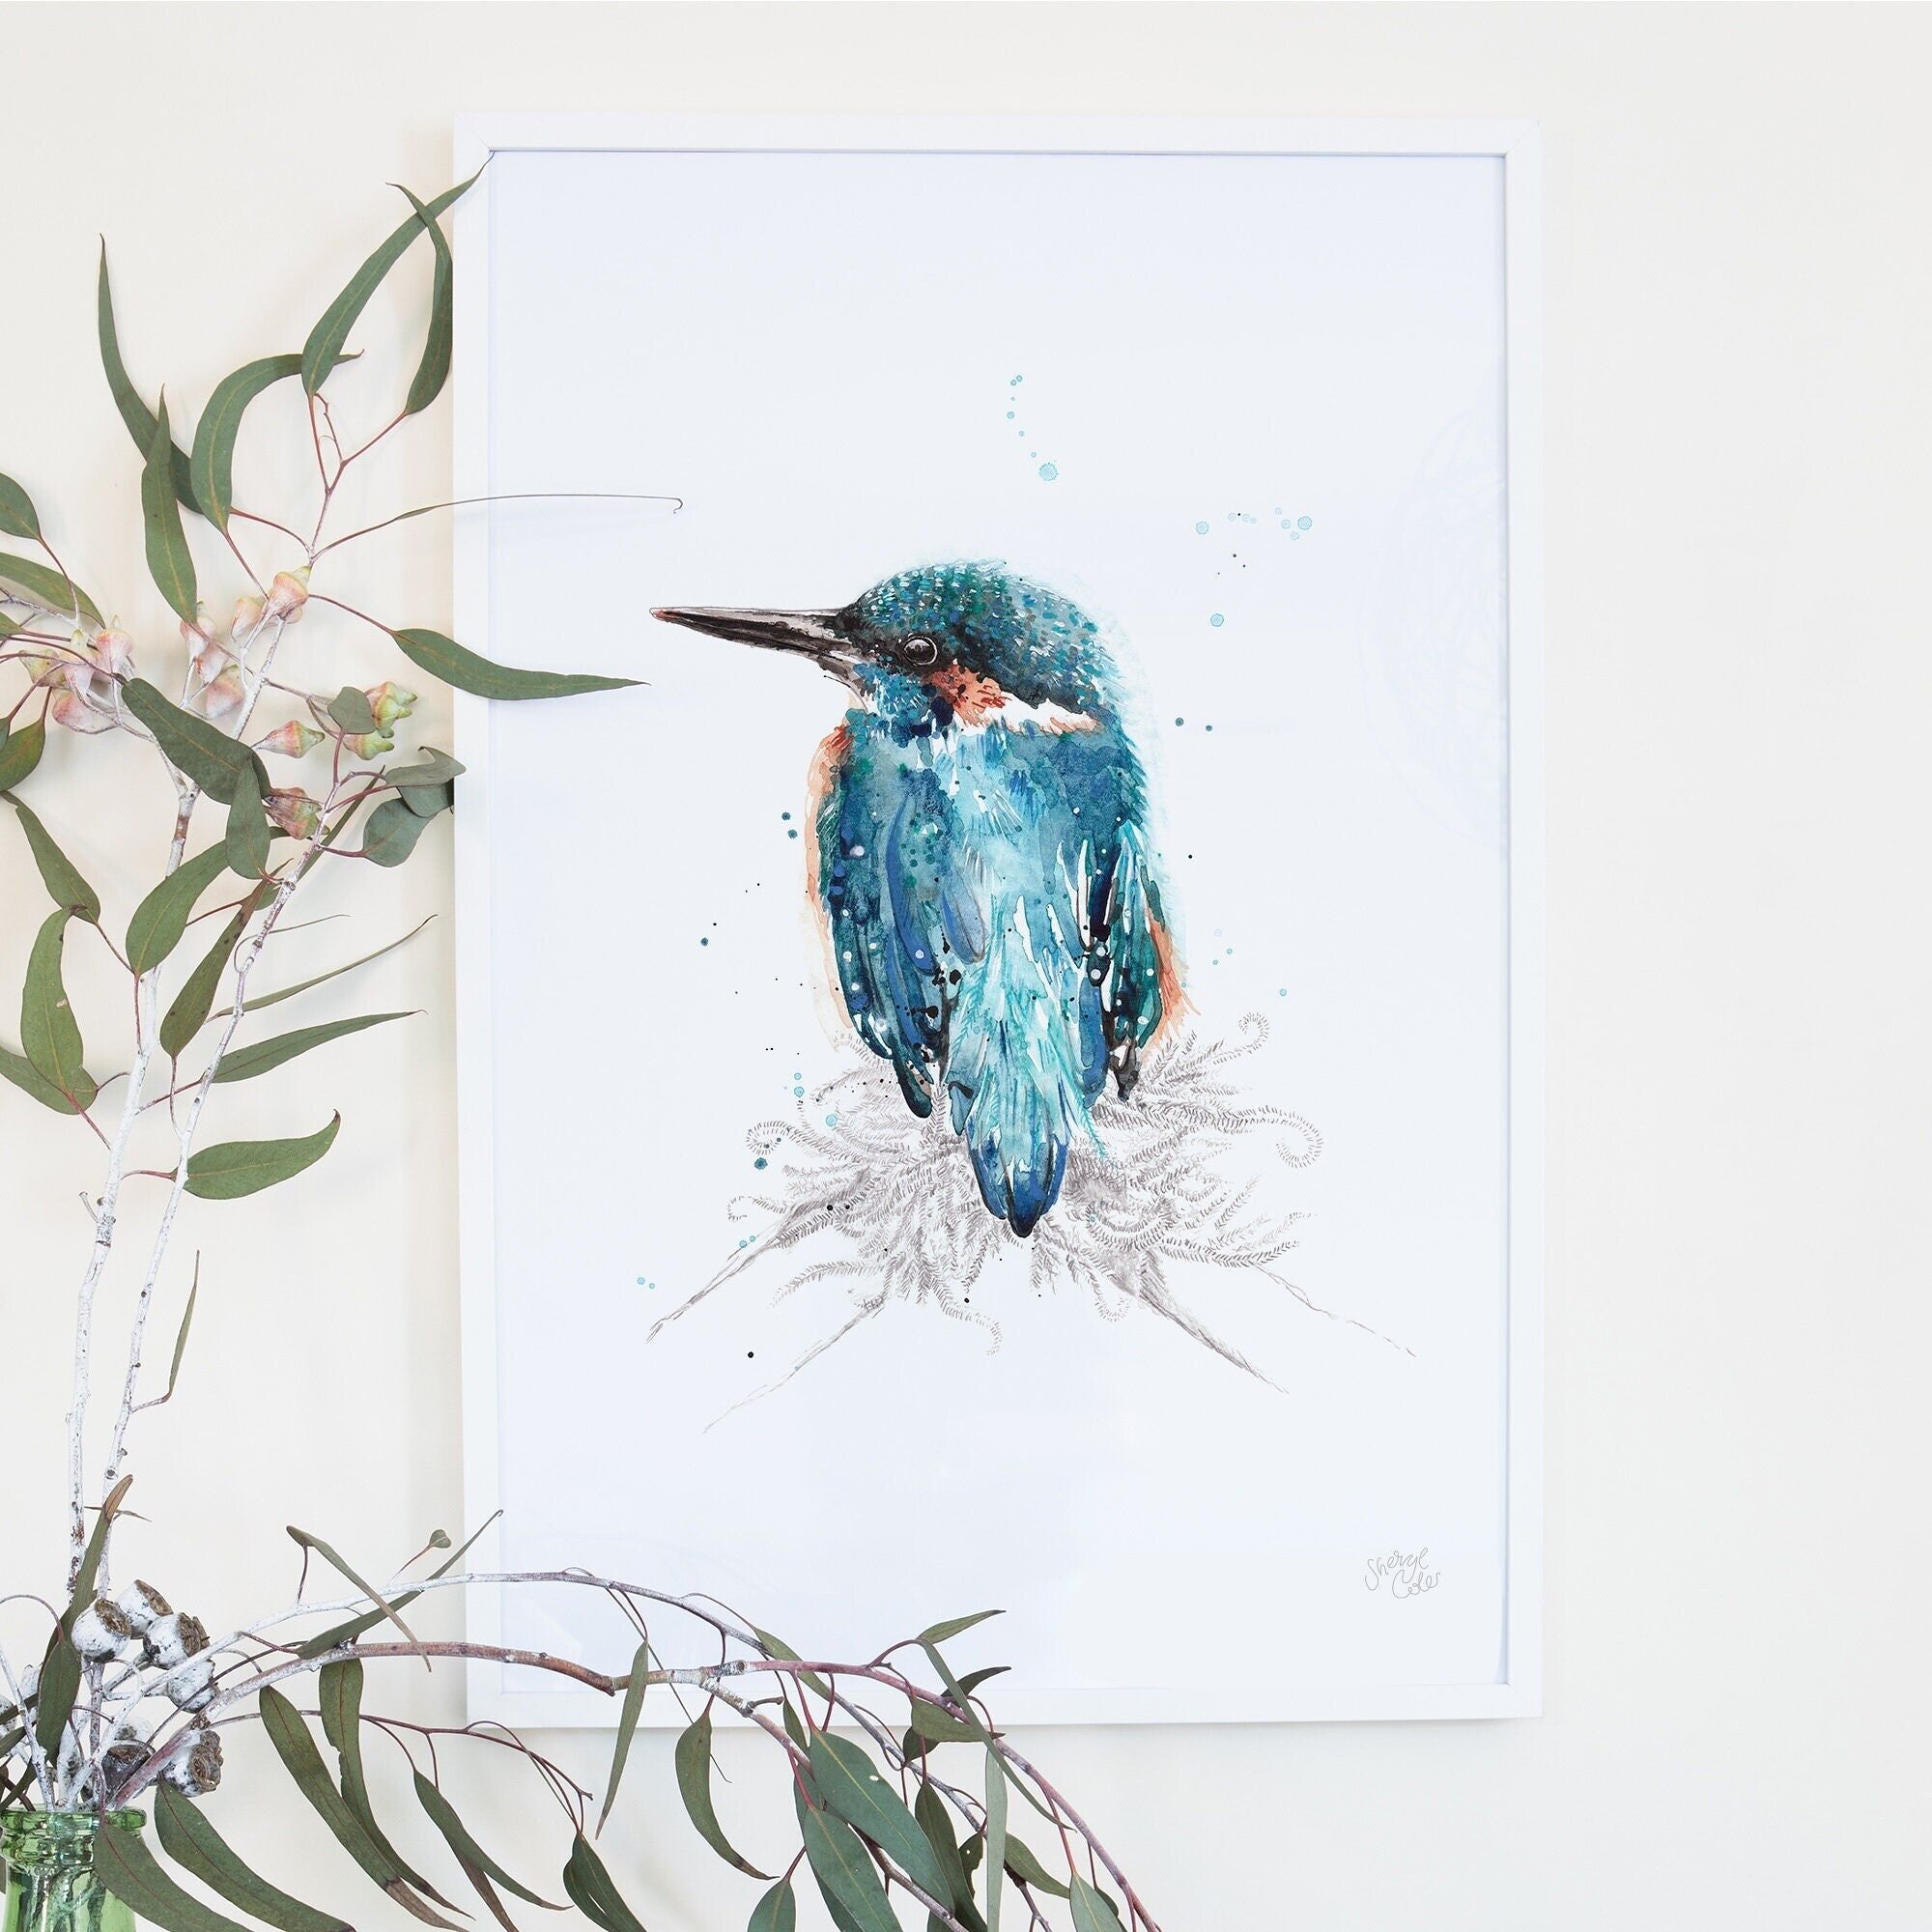 The Australian Kingfisher is part of a series of Australian native bird prints.

Meet AZURE the Australian Kingfisher. 

DID YOU KNOW: A Kingfisher flies into your life as a symbol of determination, abundance, peace and prosperity. Kingfisher teaches